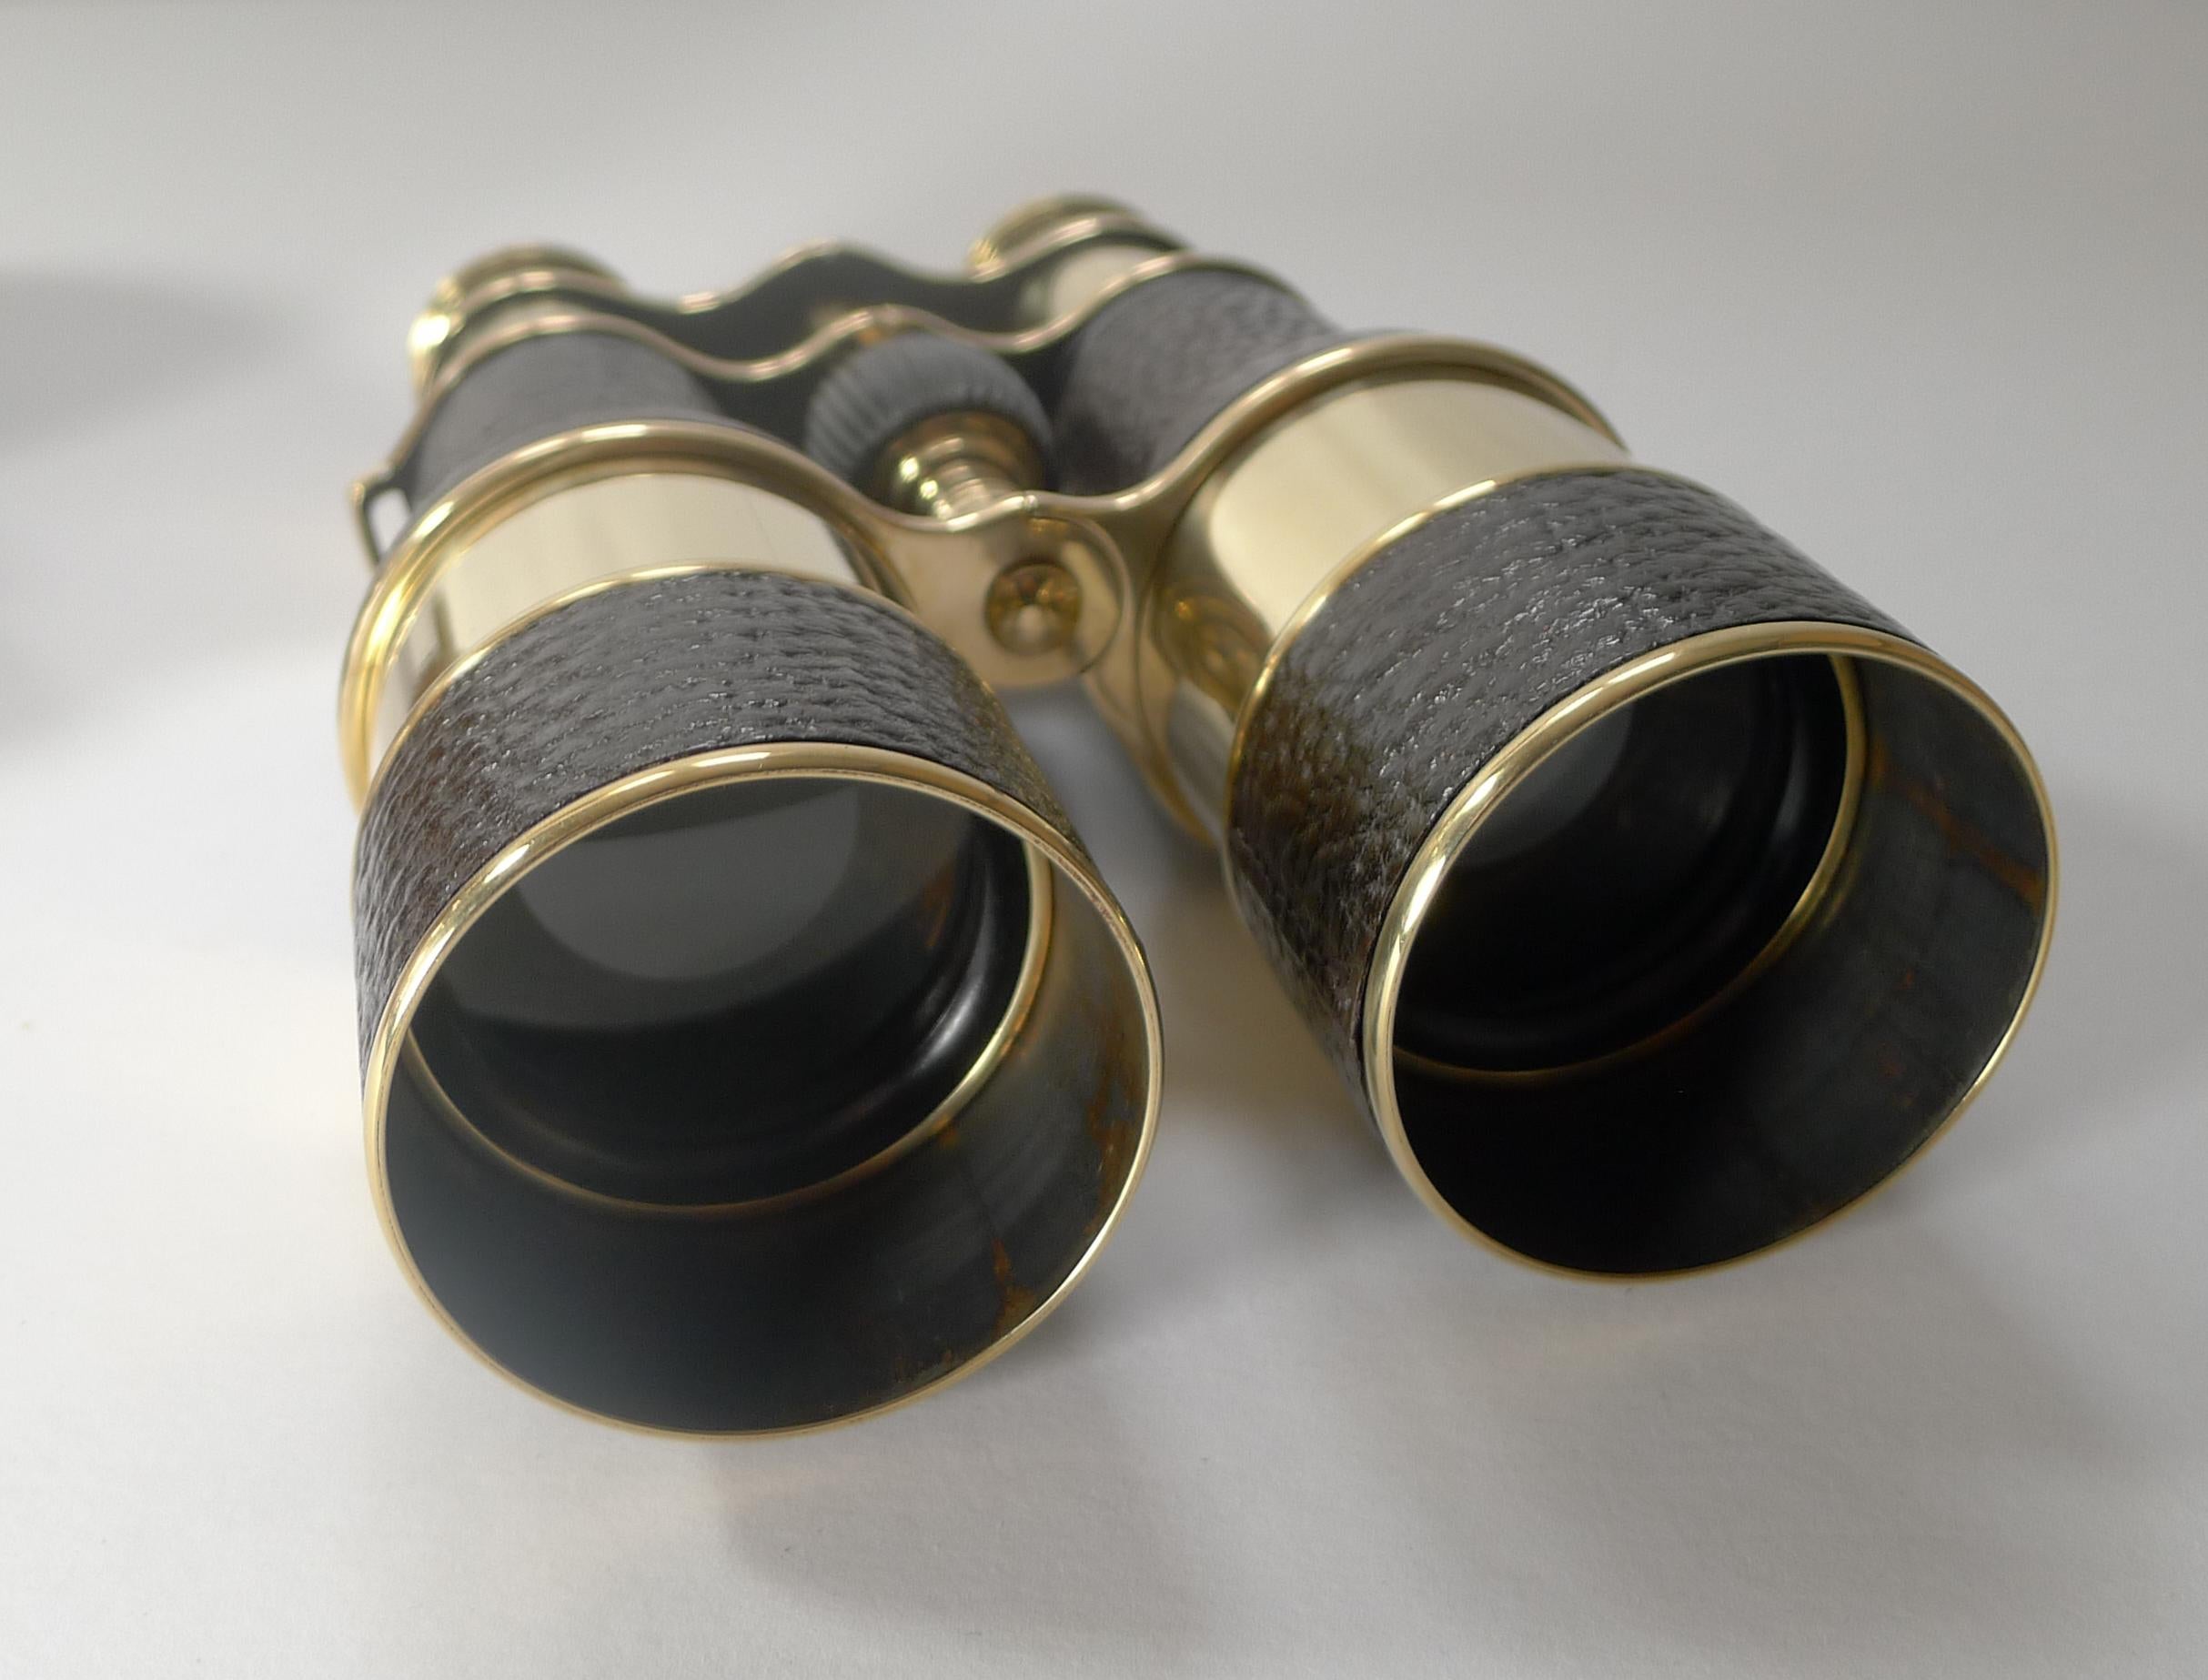 A fabulous pair of World War 1 British Officers Military binoculars made in France, signed Colmont Paris with both the brass on the binoculars and the leather case with the British military crows foot mark. The case is also stamped with the retailer